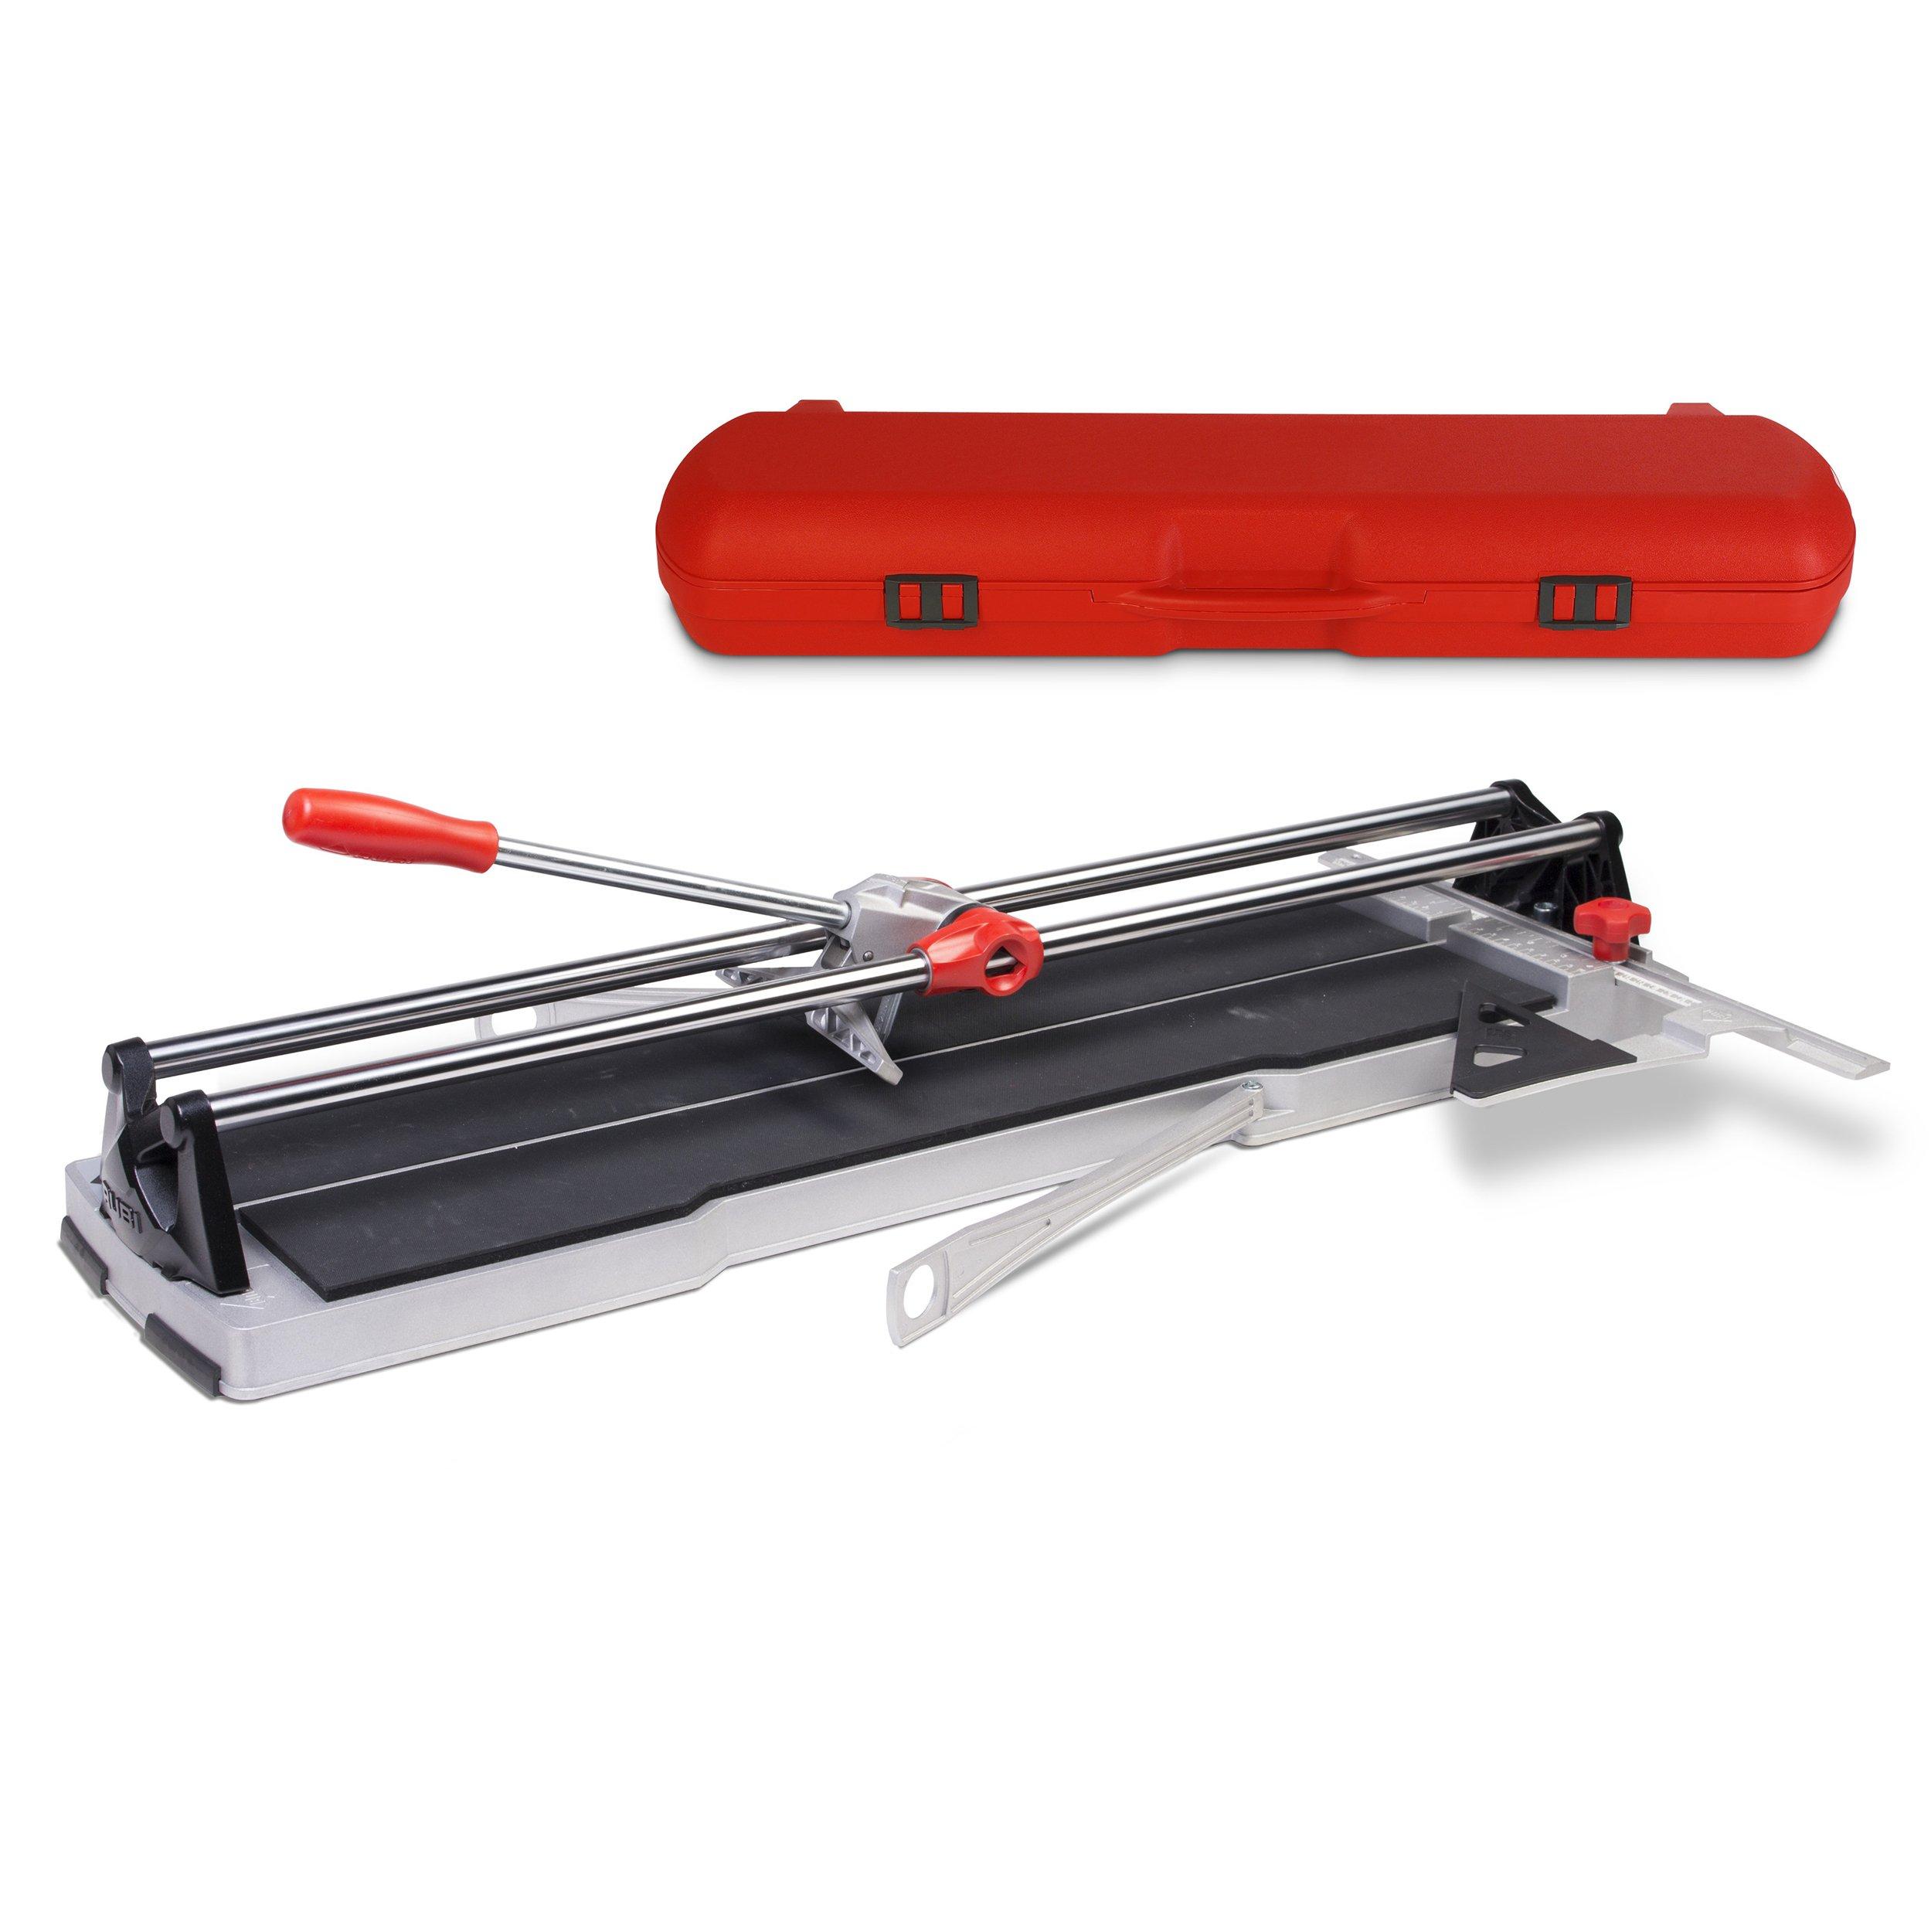 Rubi 36in. Manual Cutter with Carrying Case